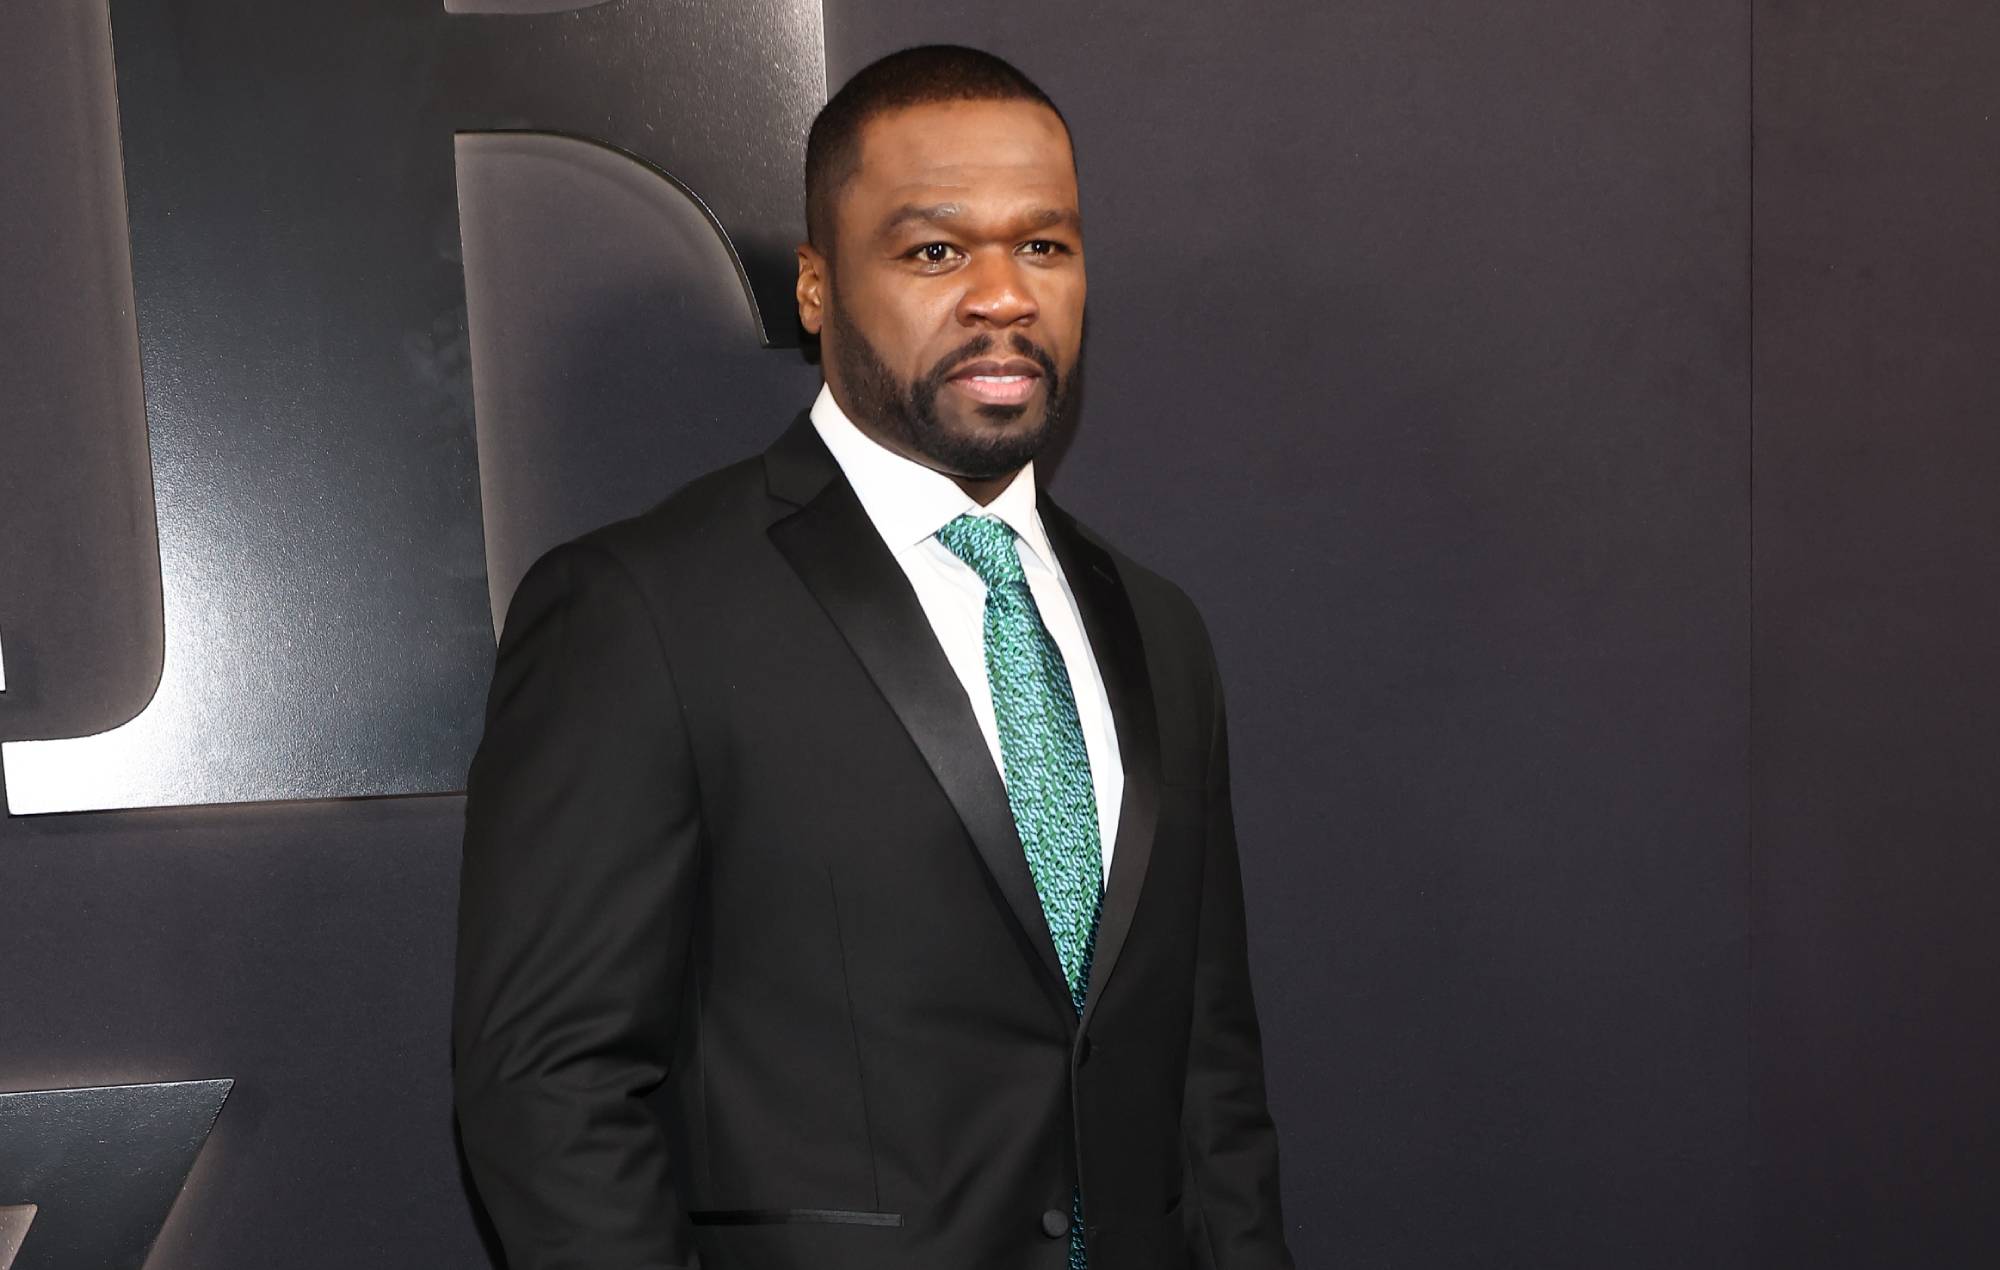 50 Cent complains about appearance on ‘The Expendables 4’ poster: “Did we run out of money?”